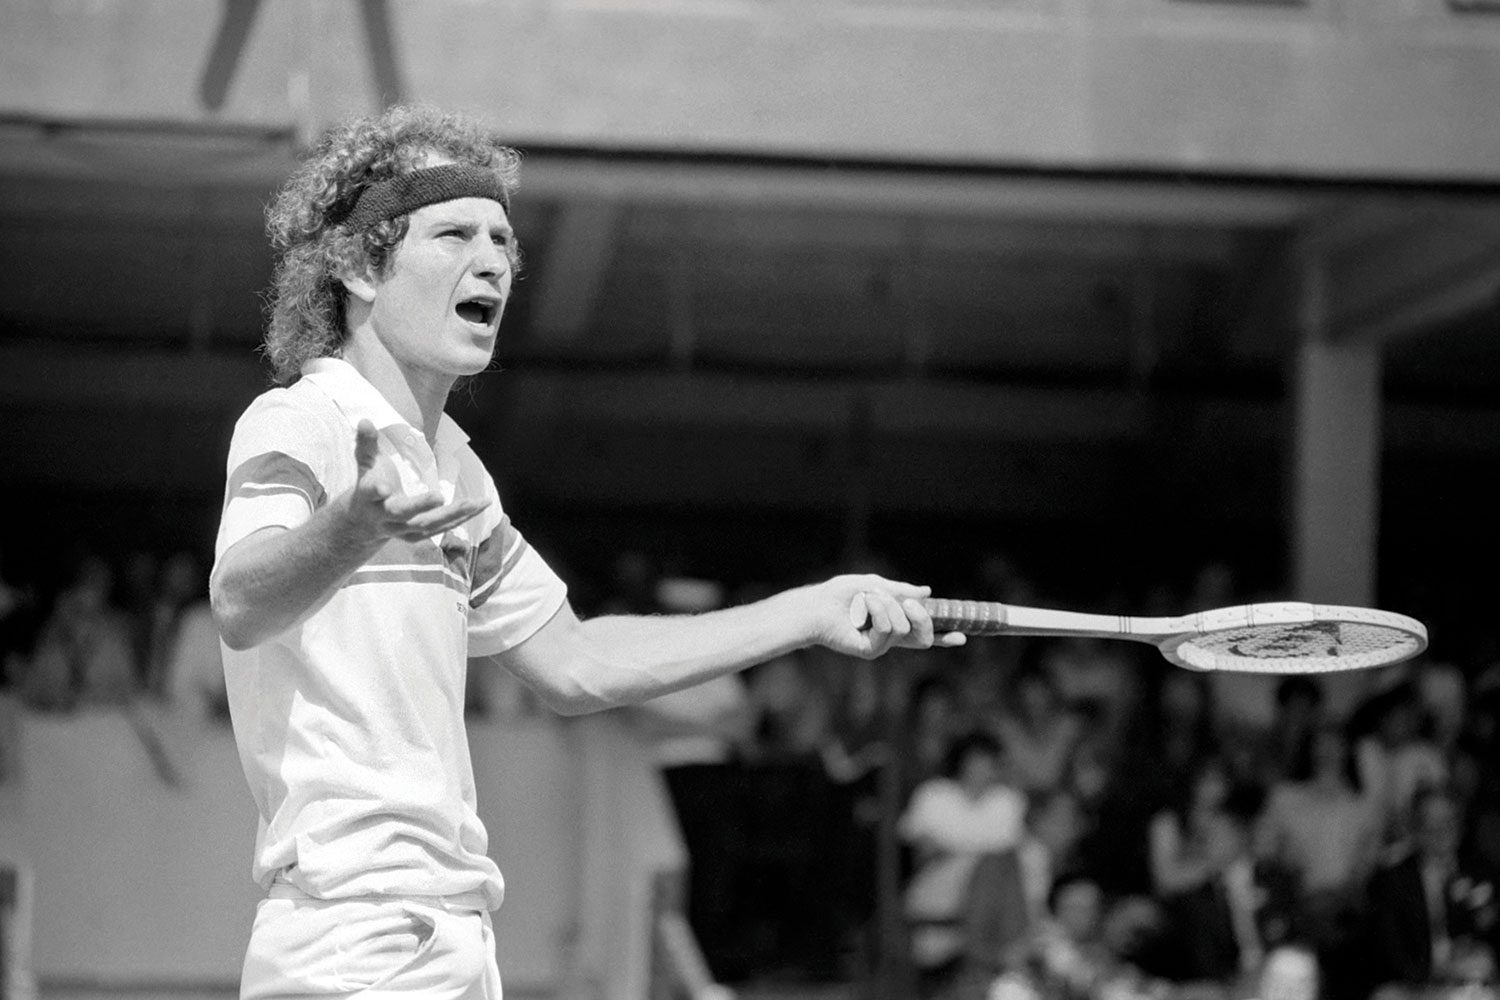 John McEnroe became the embodiment of an athlete not handling negative outcomes well.